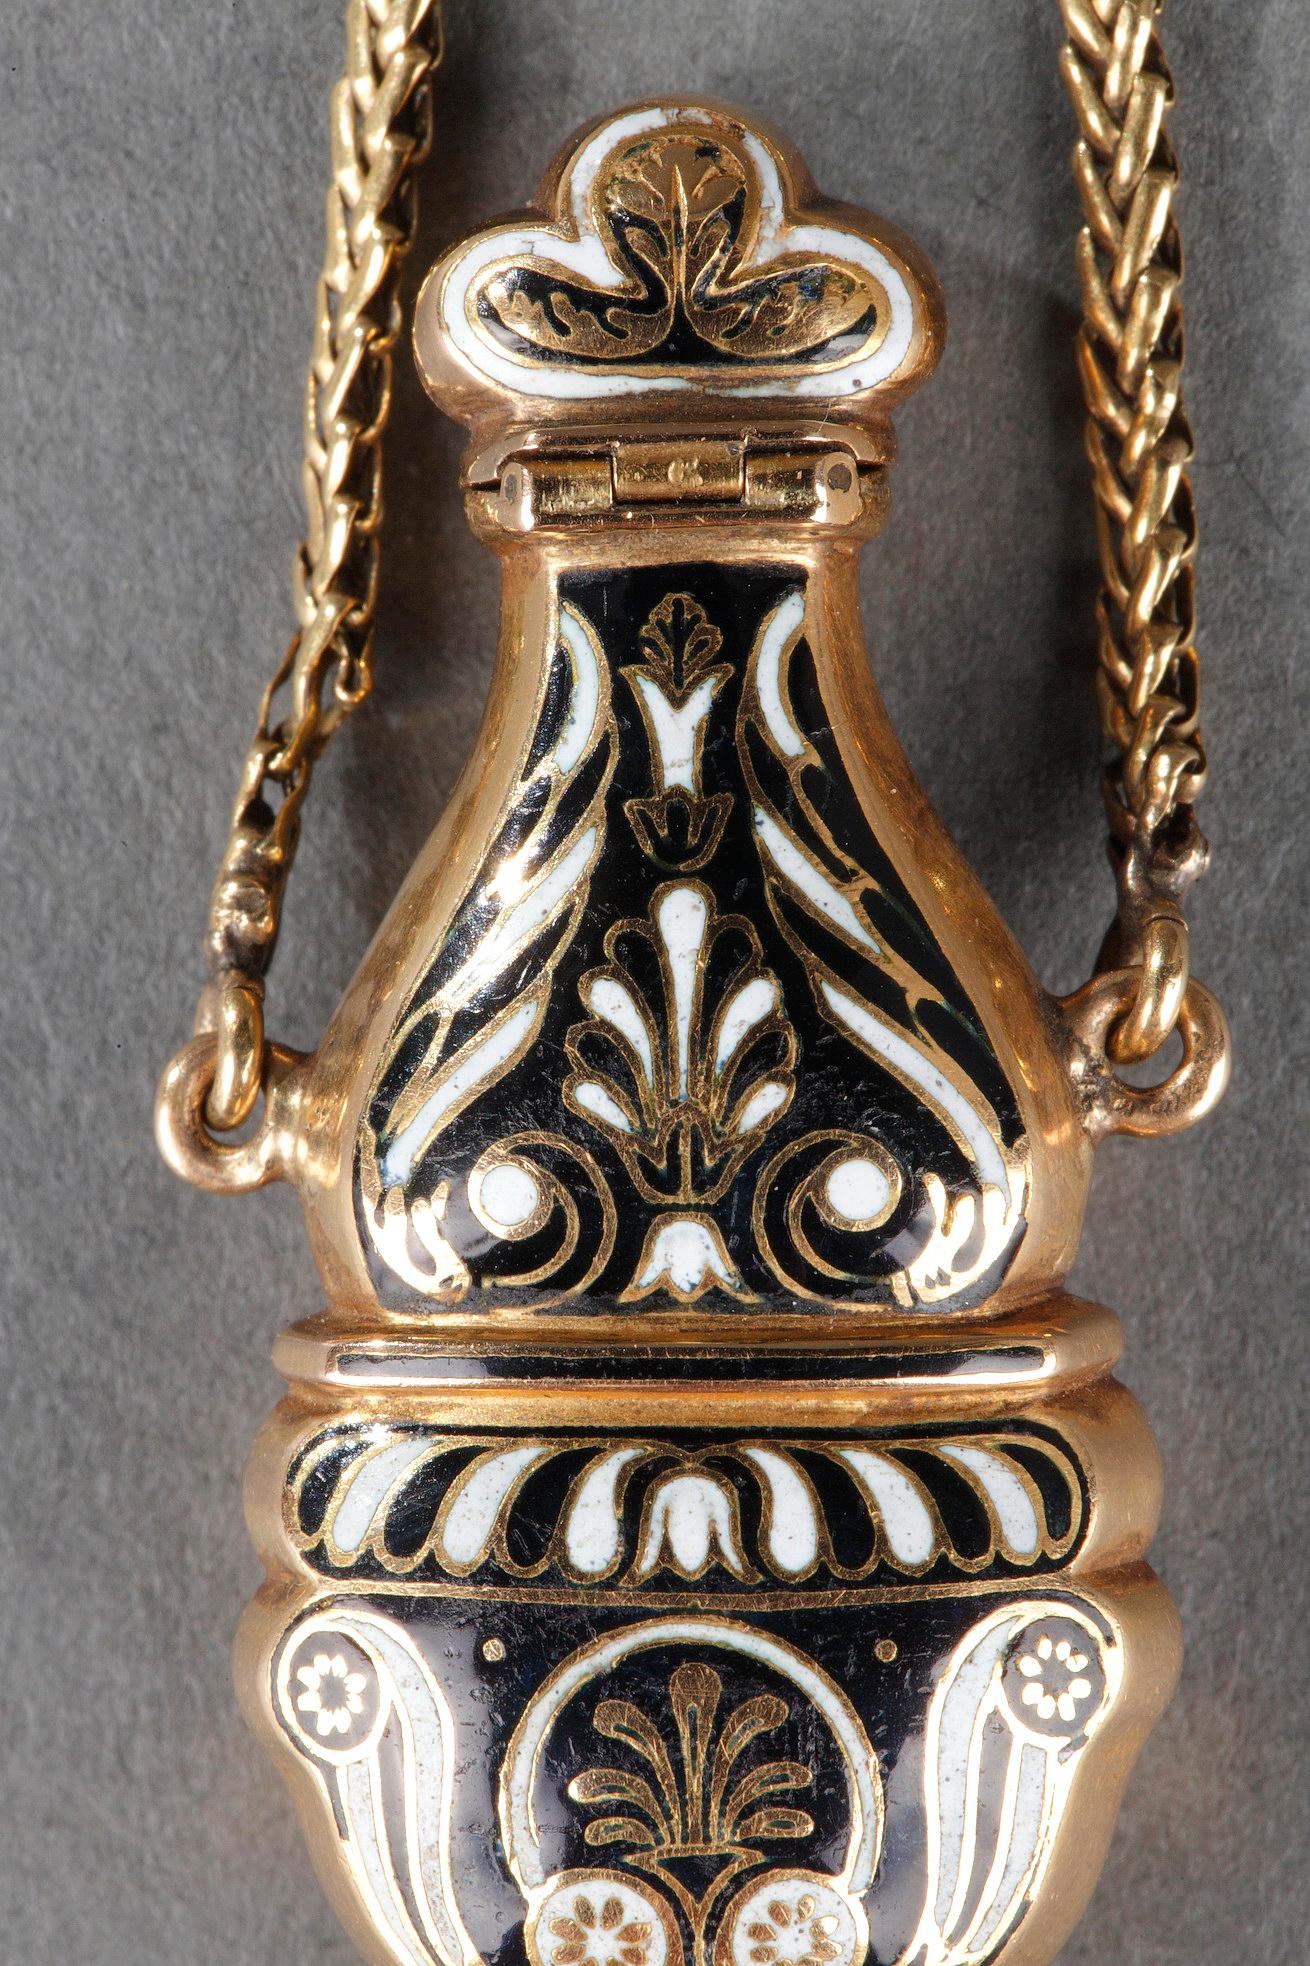 Gold and Enamel Perfum Bottle, Restauration Period, Circa 1830-1840 For Sale 2